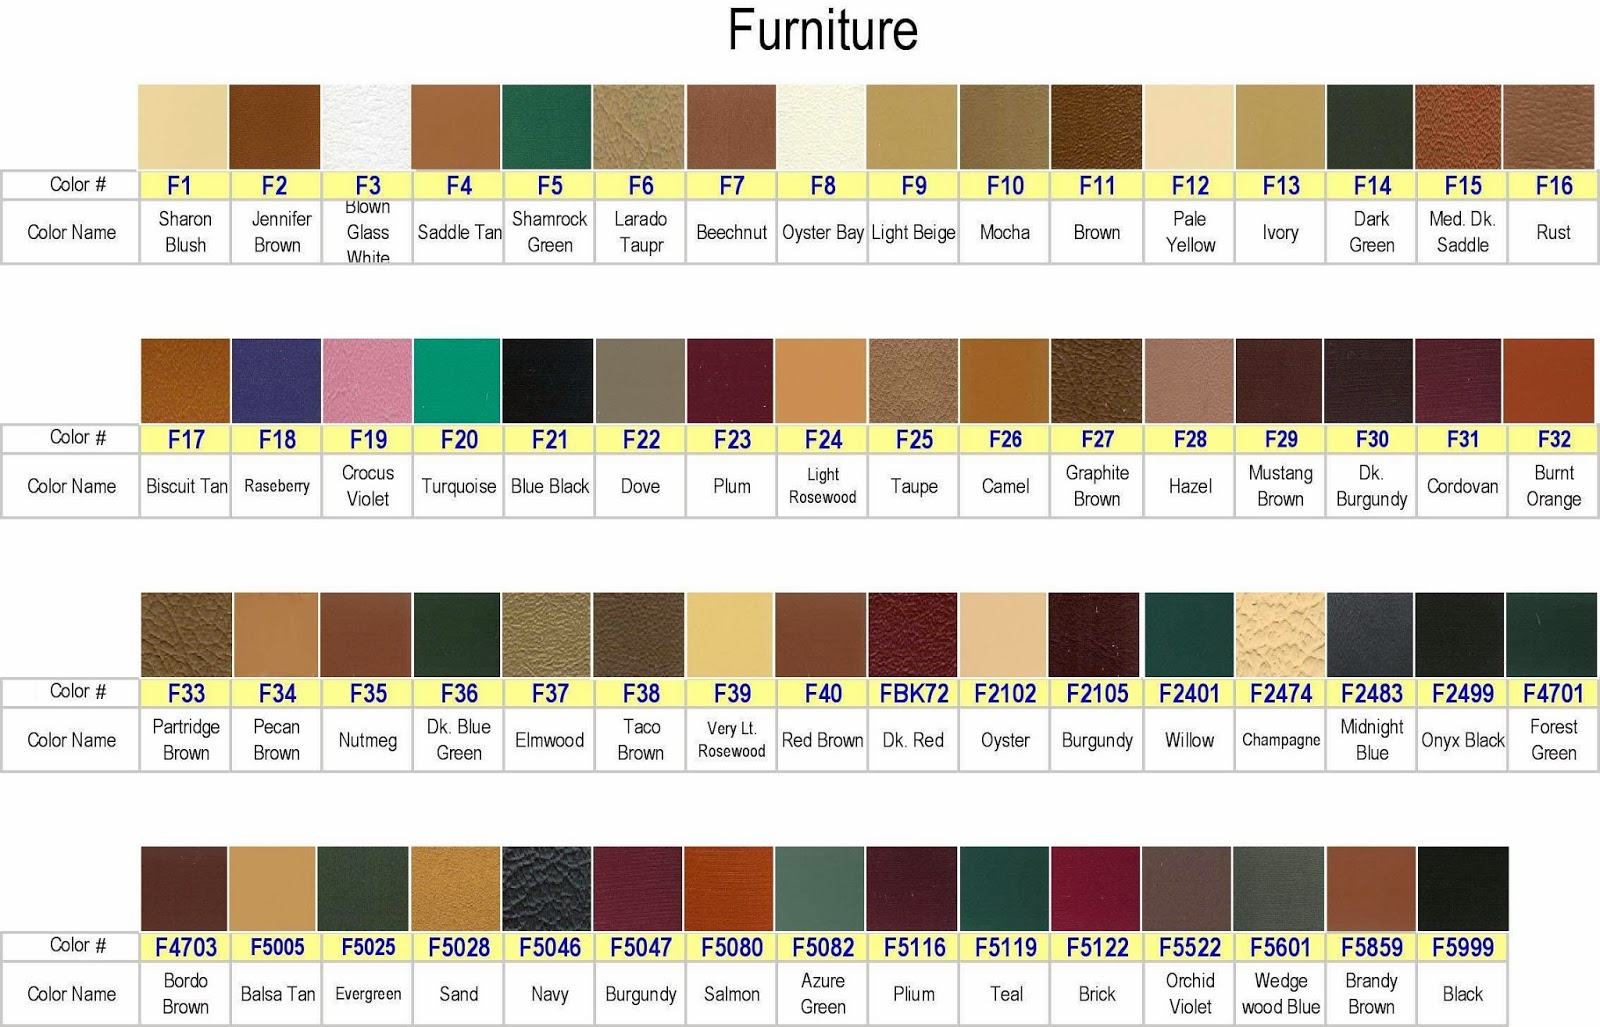 Leather Dye Color Chart